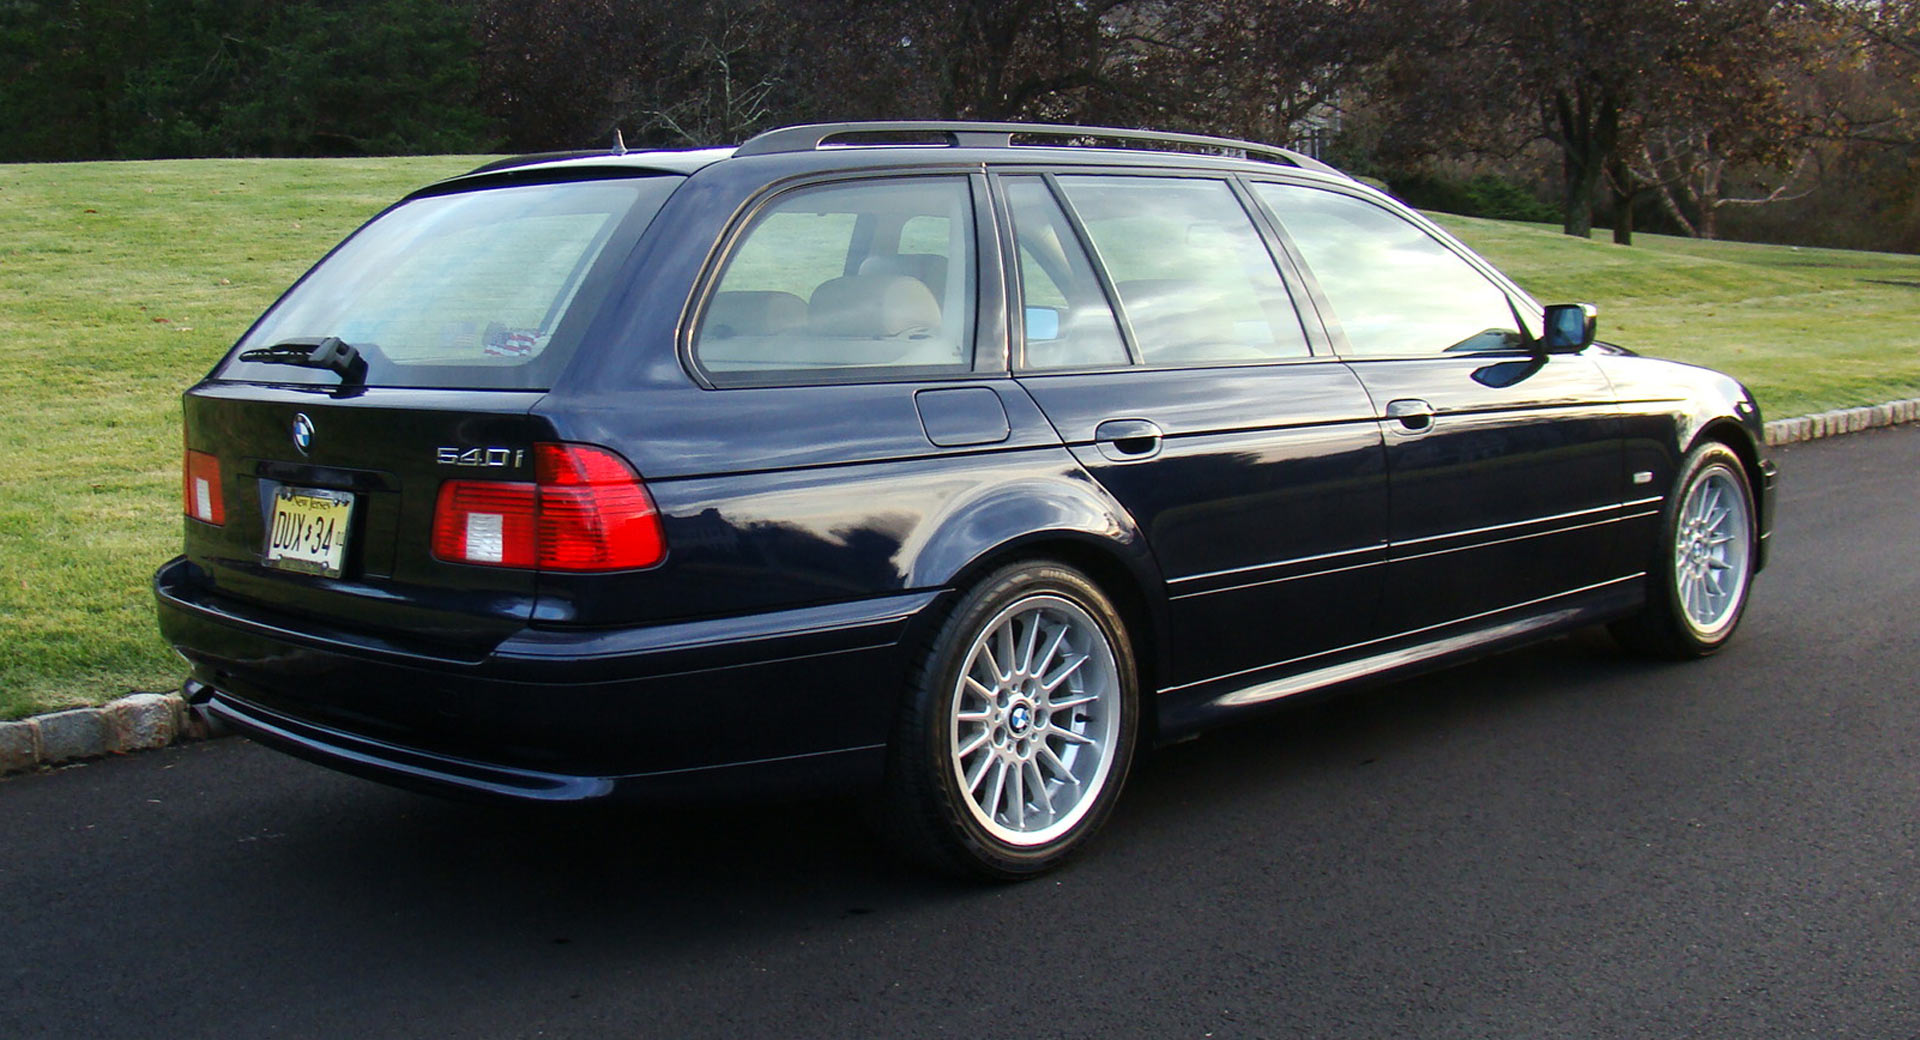 Need A Sexy RWD Wagon? Here's A 35k Mile 2001 BMW 540i V8 Touring |  Carscoops